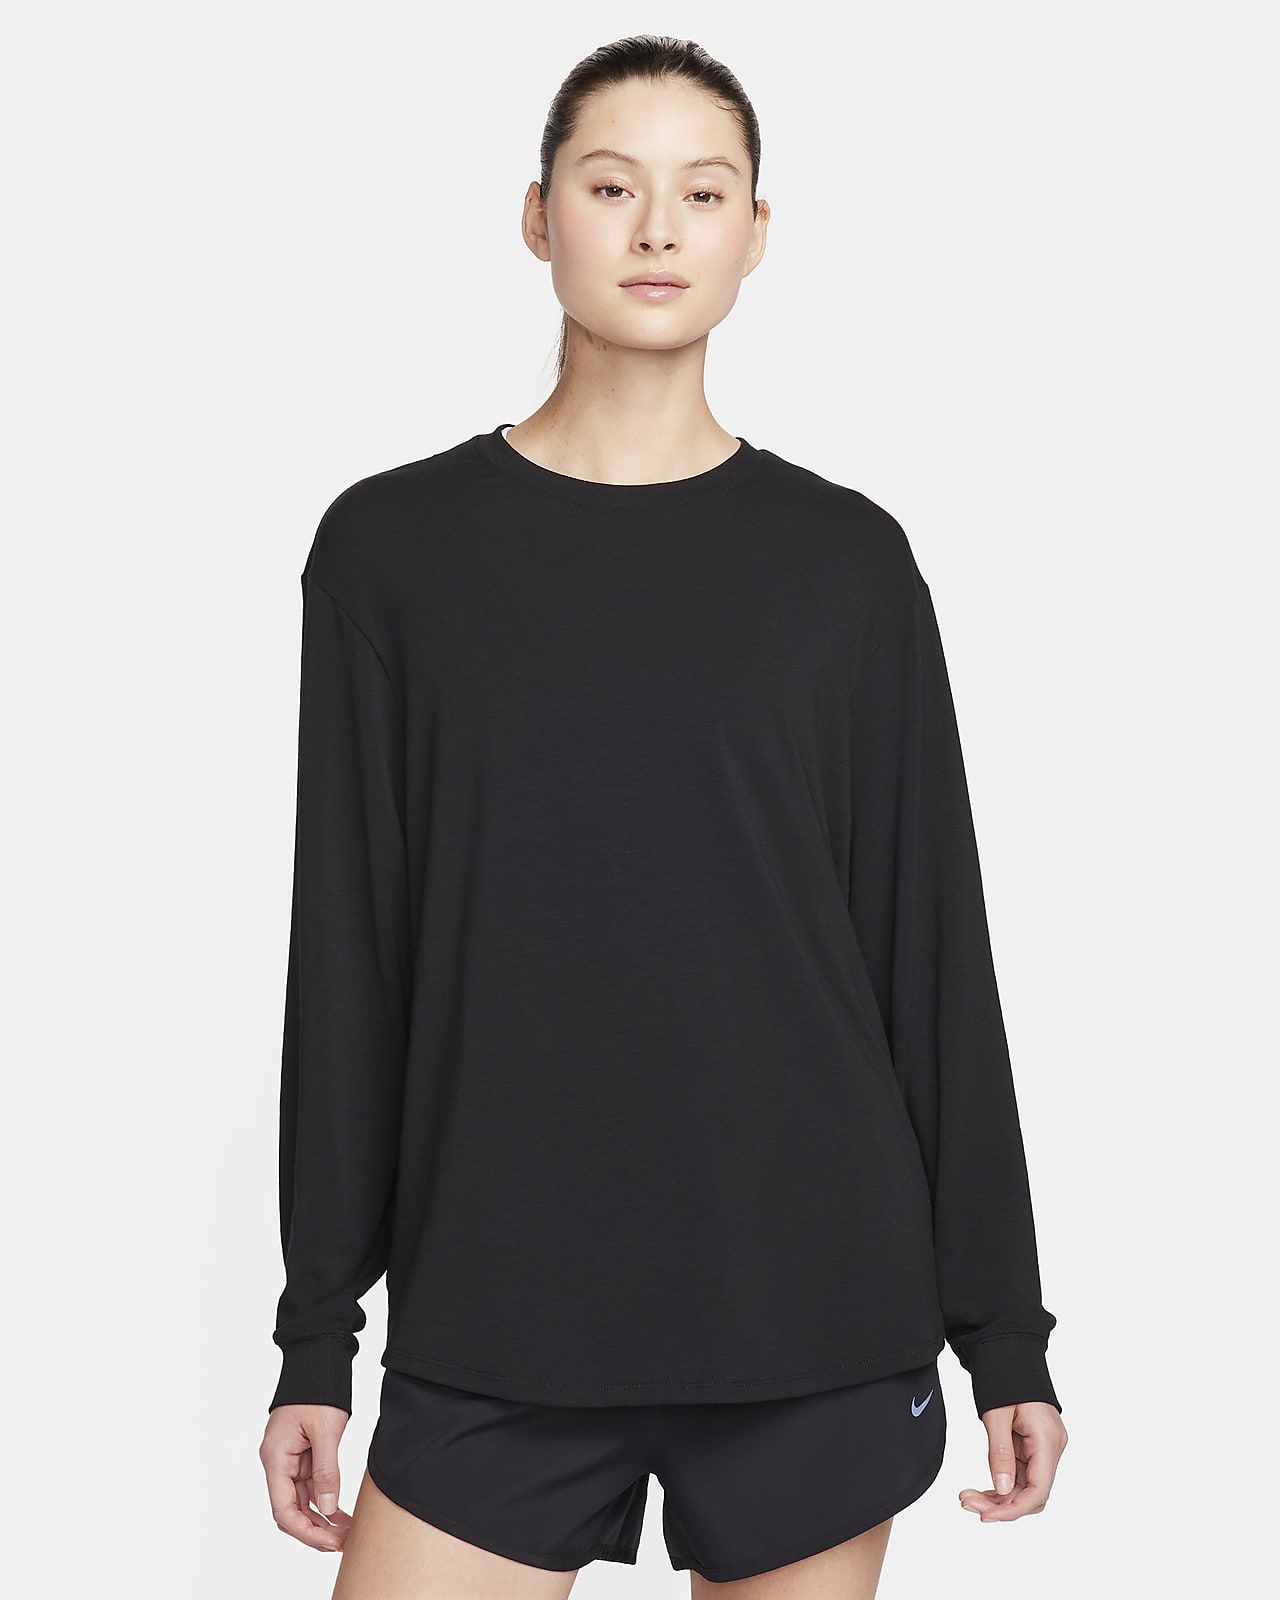 Nike One Relaxed Women's Dri-FIT Long-Sleeve Top